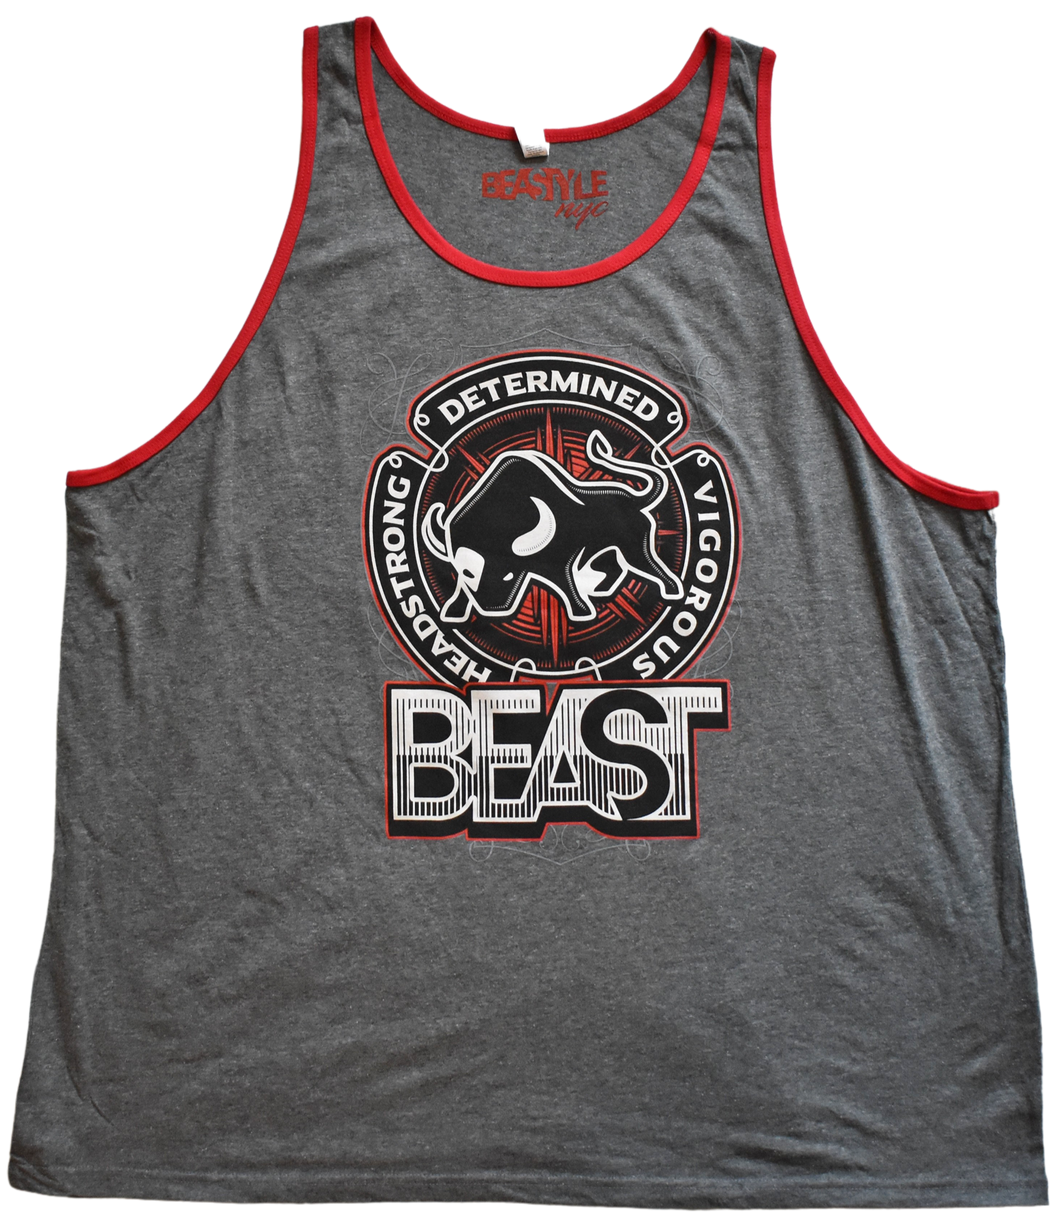 The Bull Gray Tank Top with Red Trim